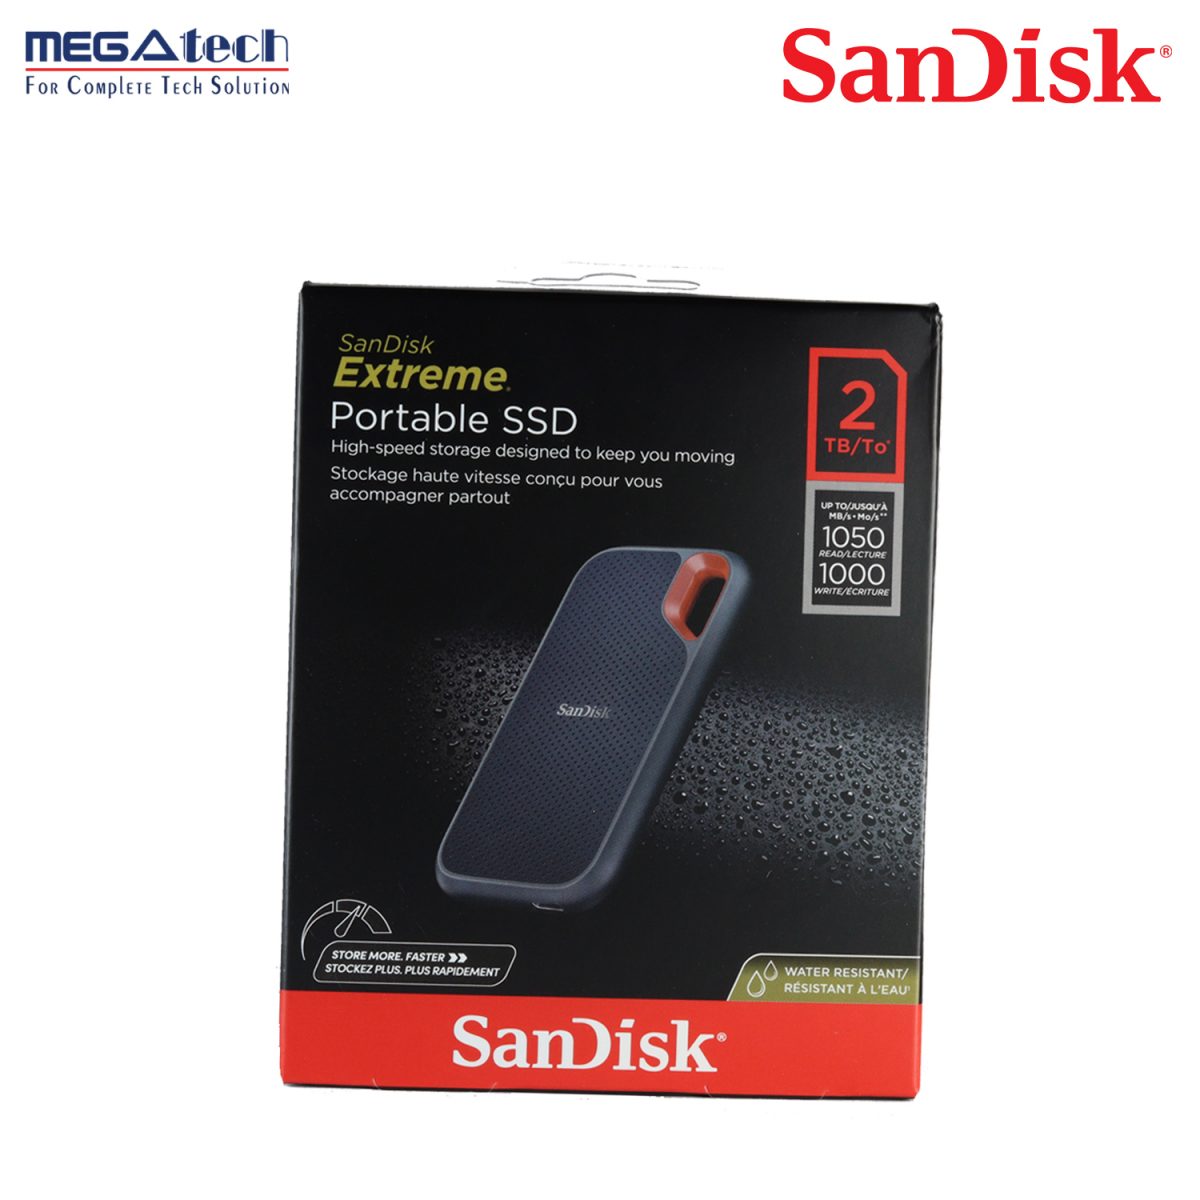 SanDisk Extreme Portable SSD 2 TB  1000MB/s R, for PC & MAC, Color Black